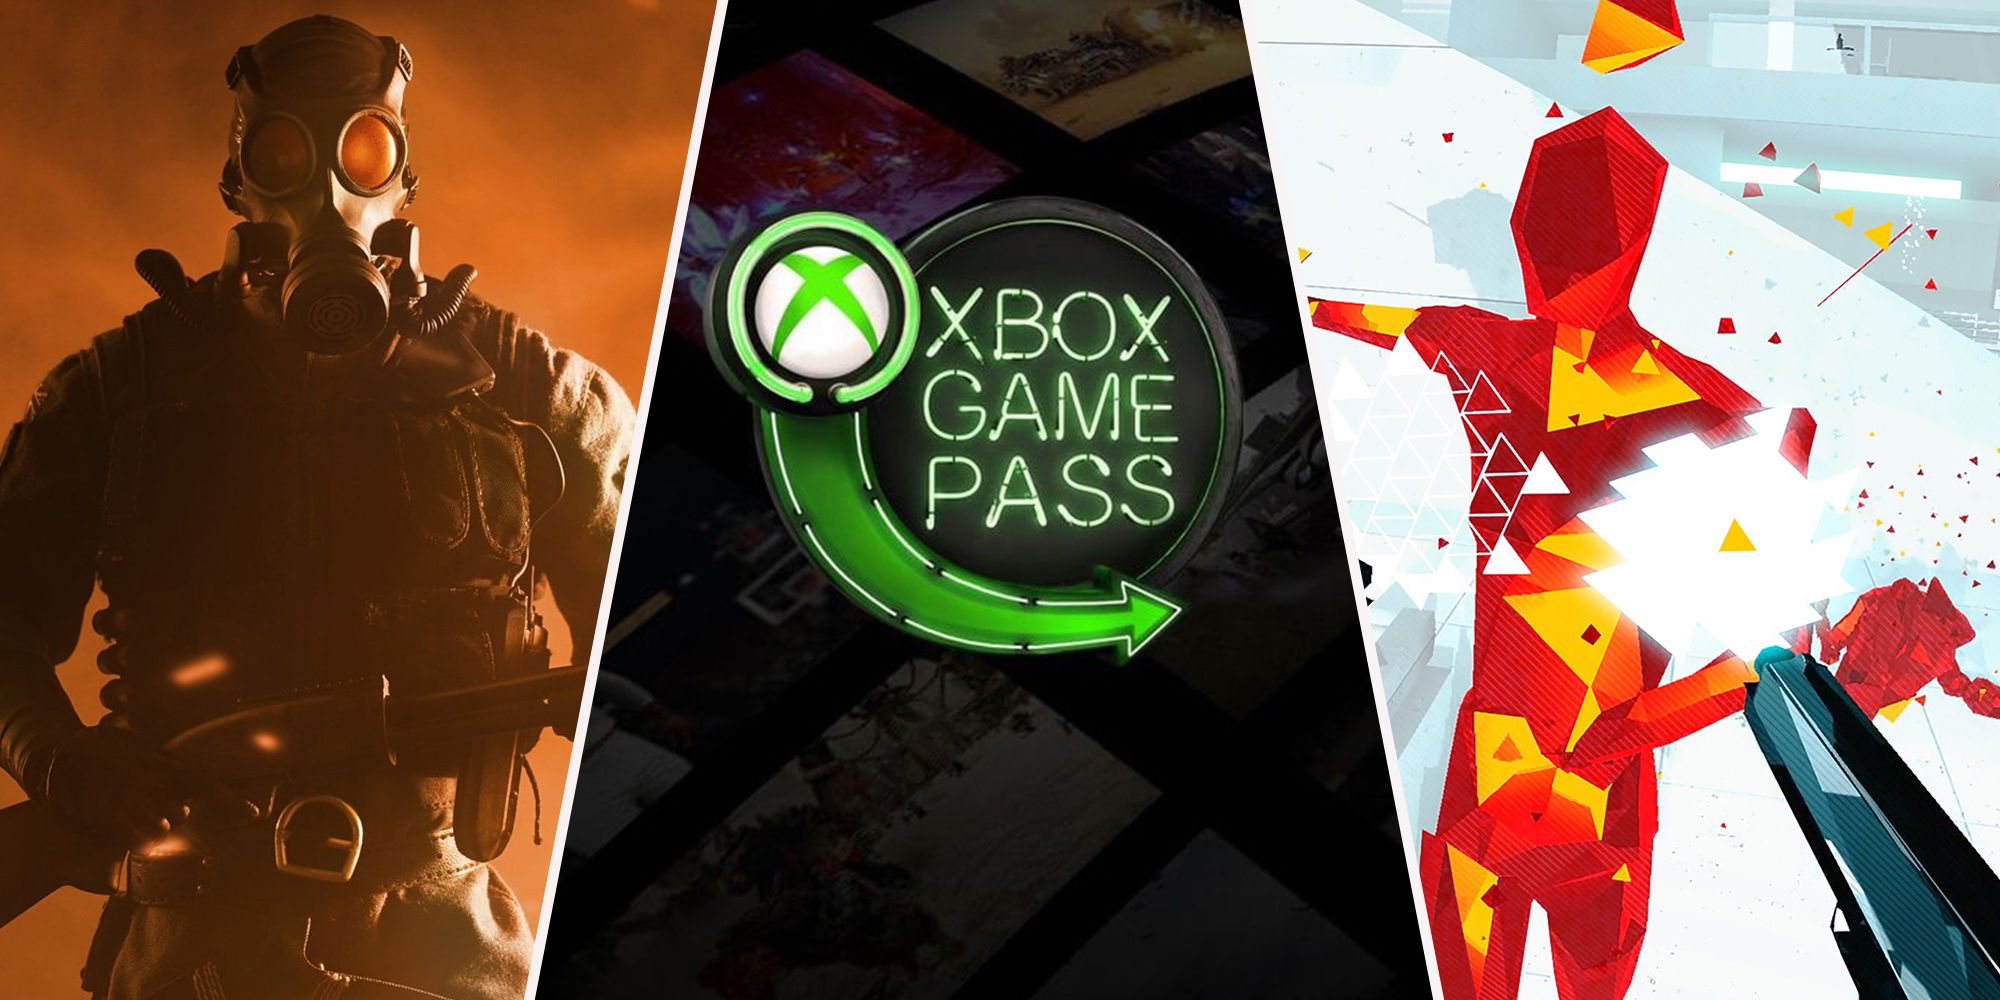 how to report to microsoft of issues with pc game pass games